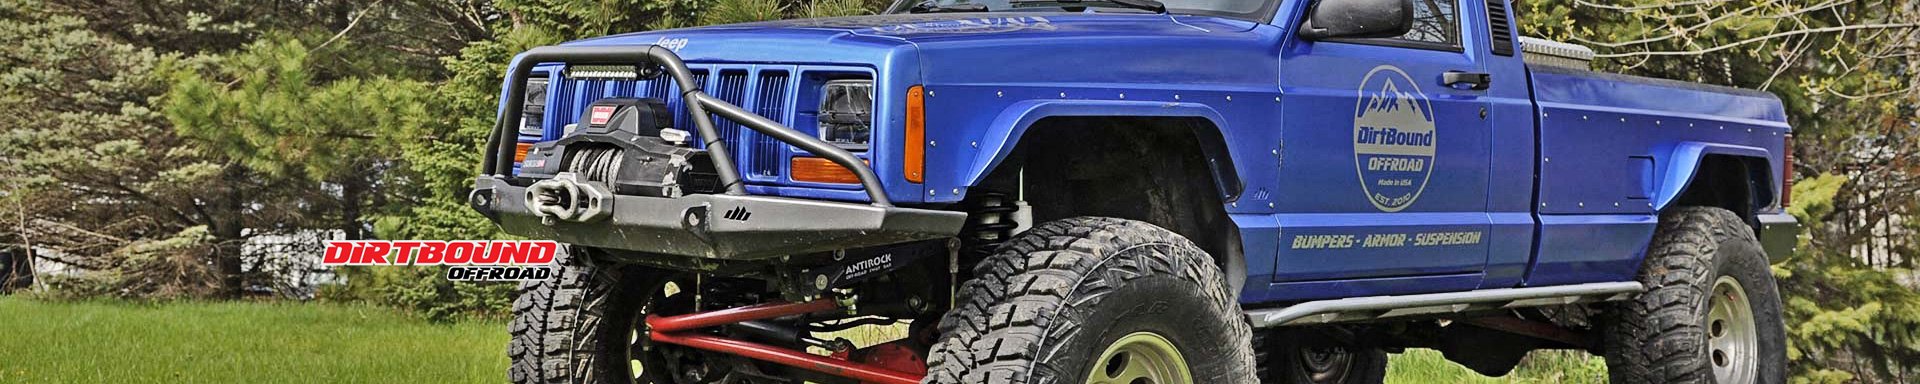 Dirtbound Offroad Off-Road Bumpers